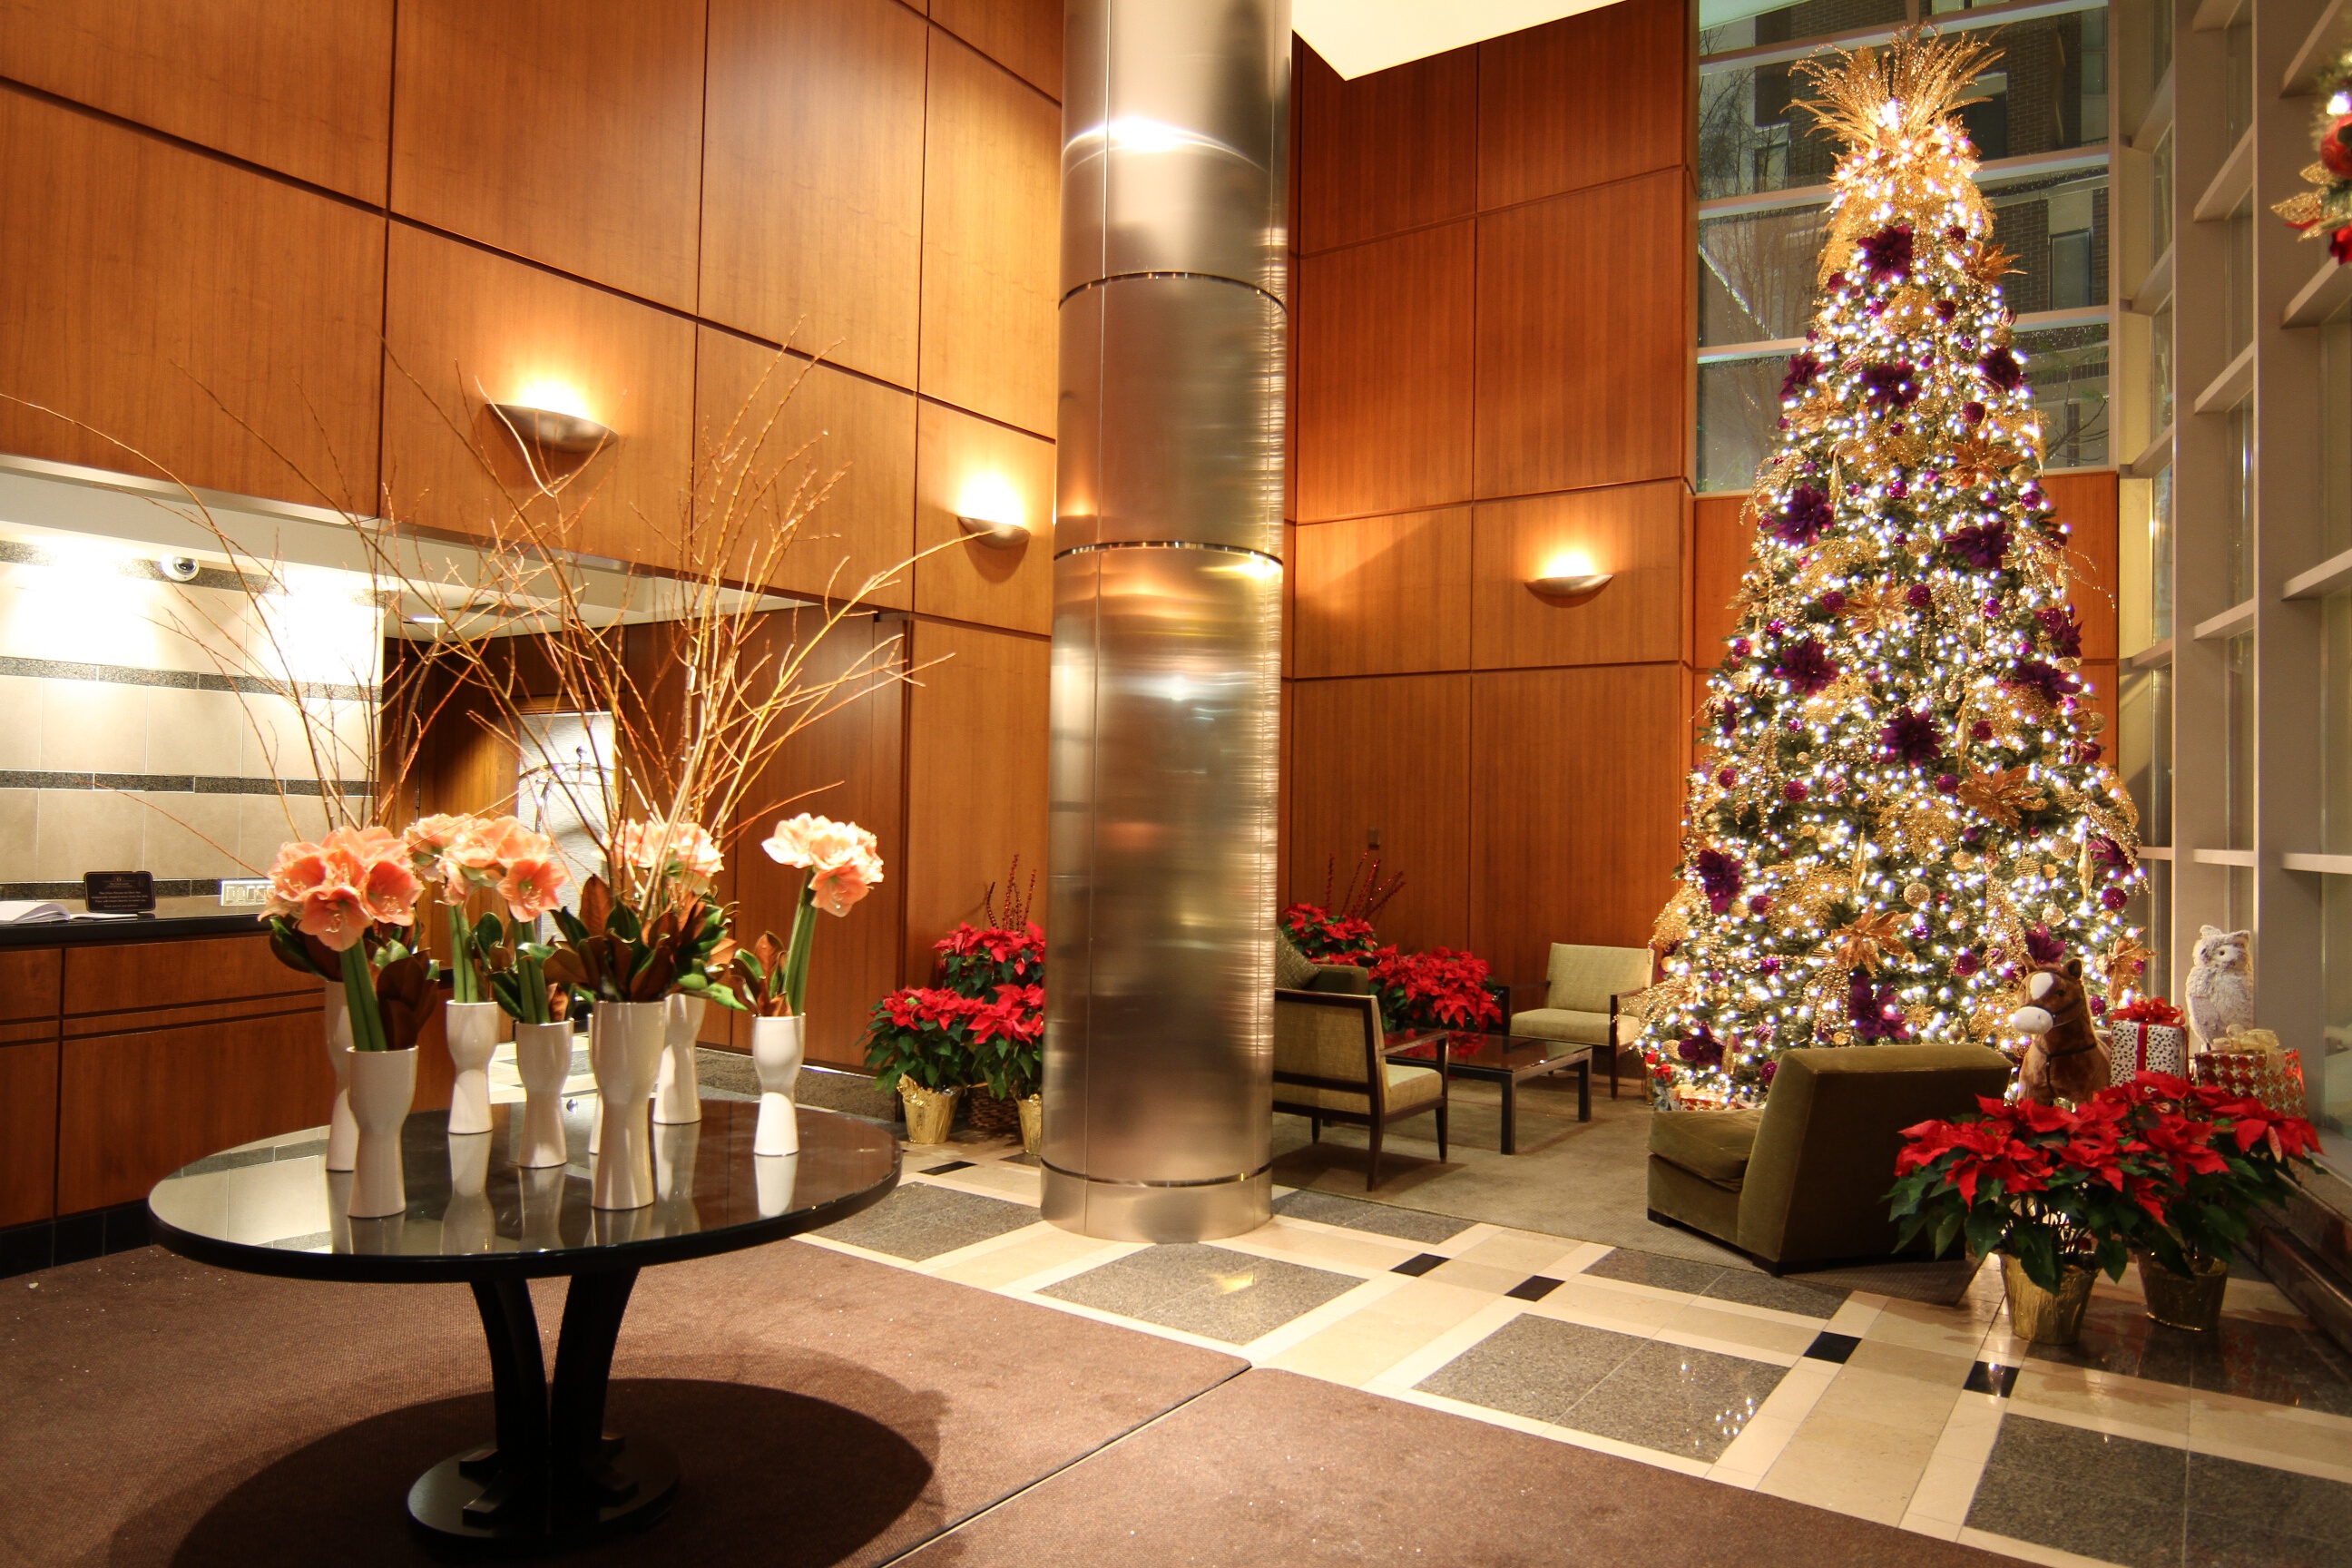 Holidays in the Lancaster lobby